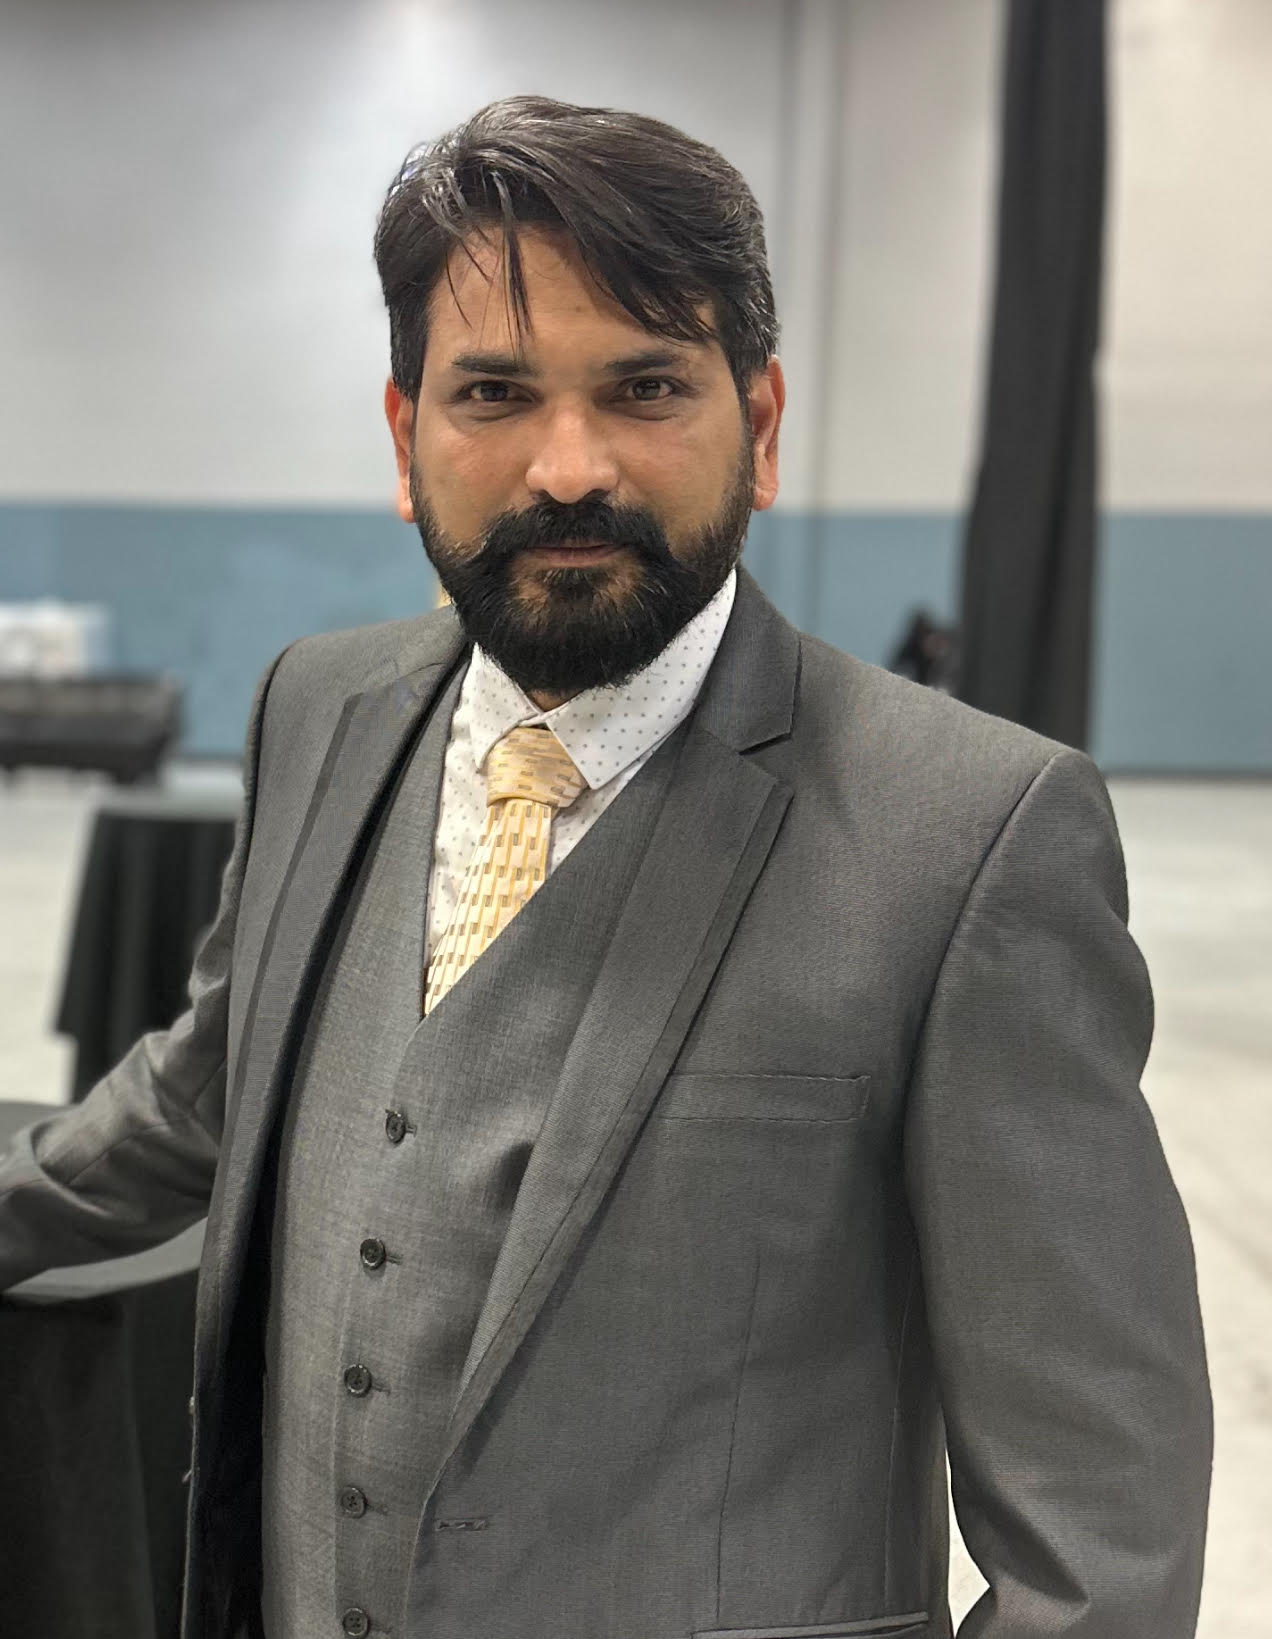 Venky Musti is a Chair for the Food committees of Mata 2020 Atlantic City